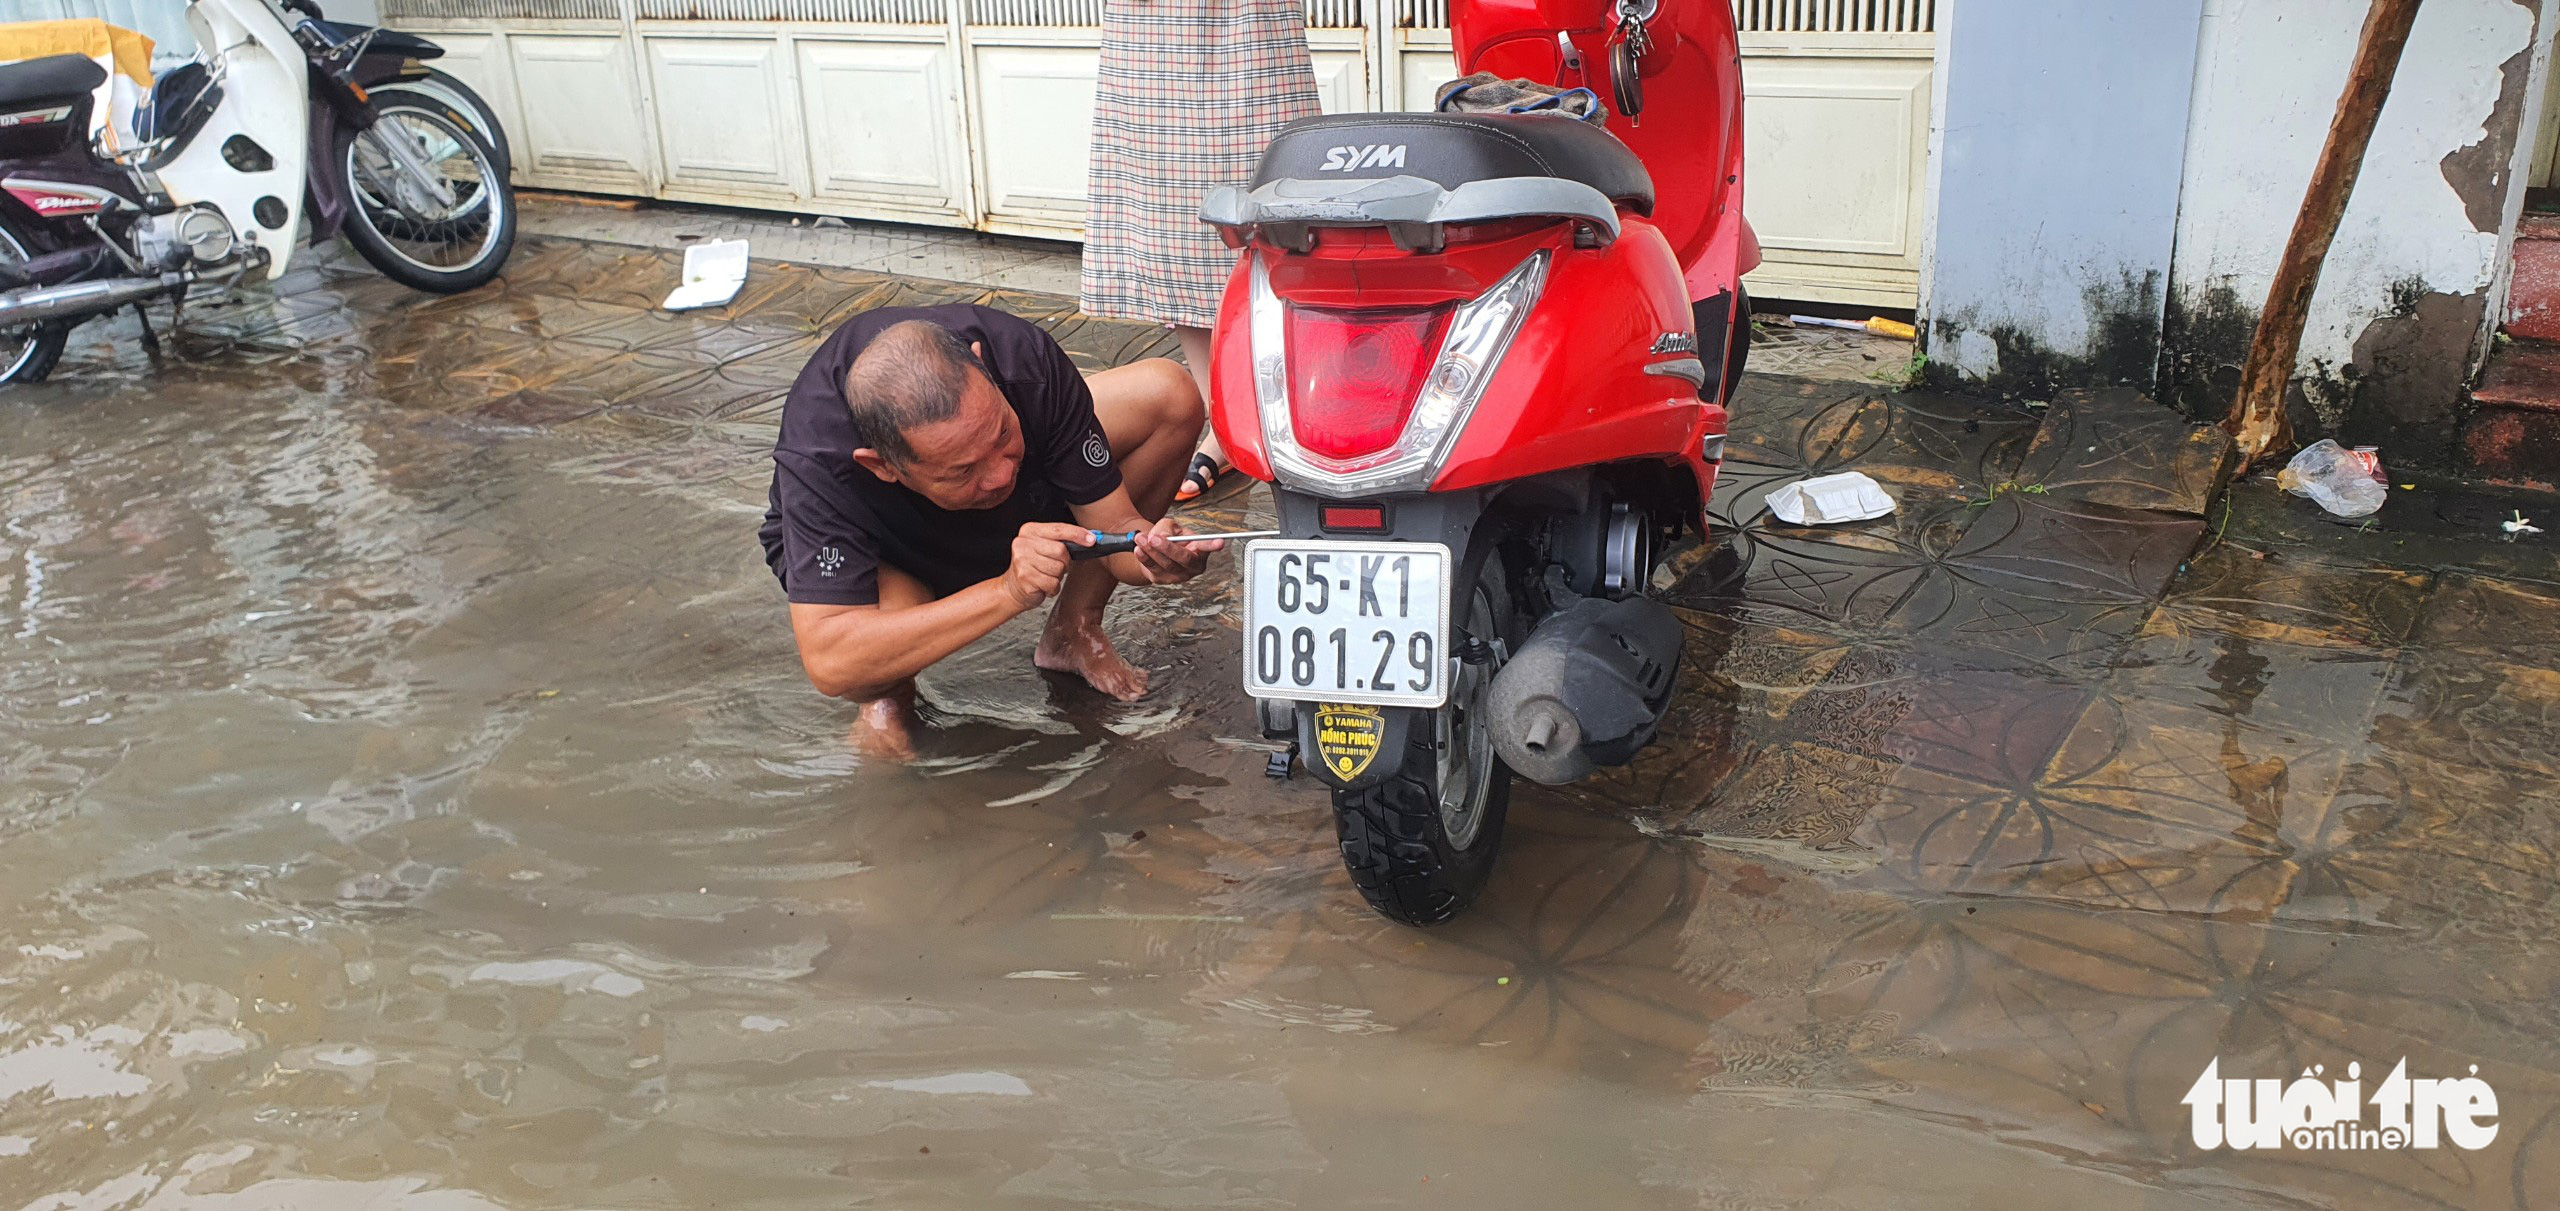 A man repairs a motorbike that broke down due to floodwater in Can Tho City, Vietnam, October 10, 2022. Photo: Chi Quoc / Tuoi Tre